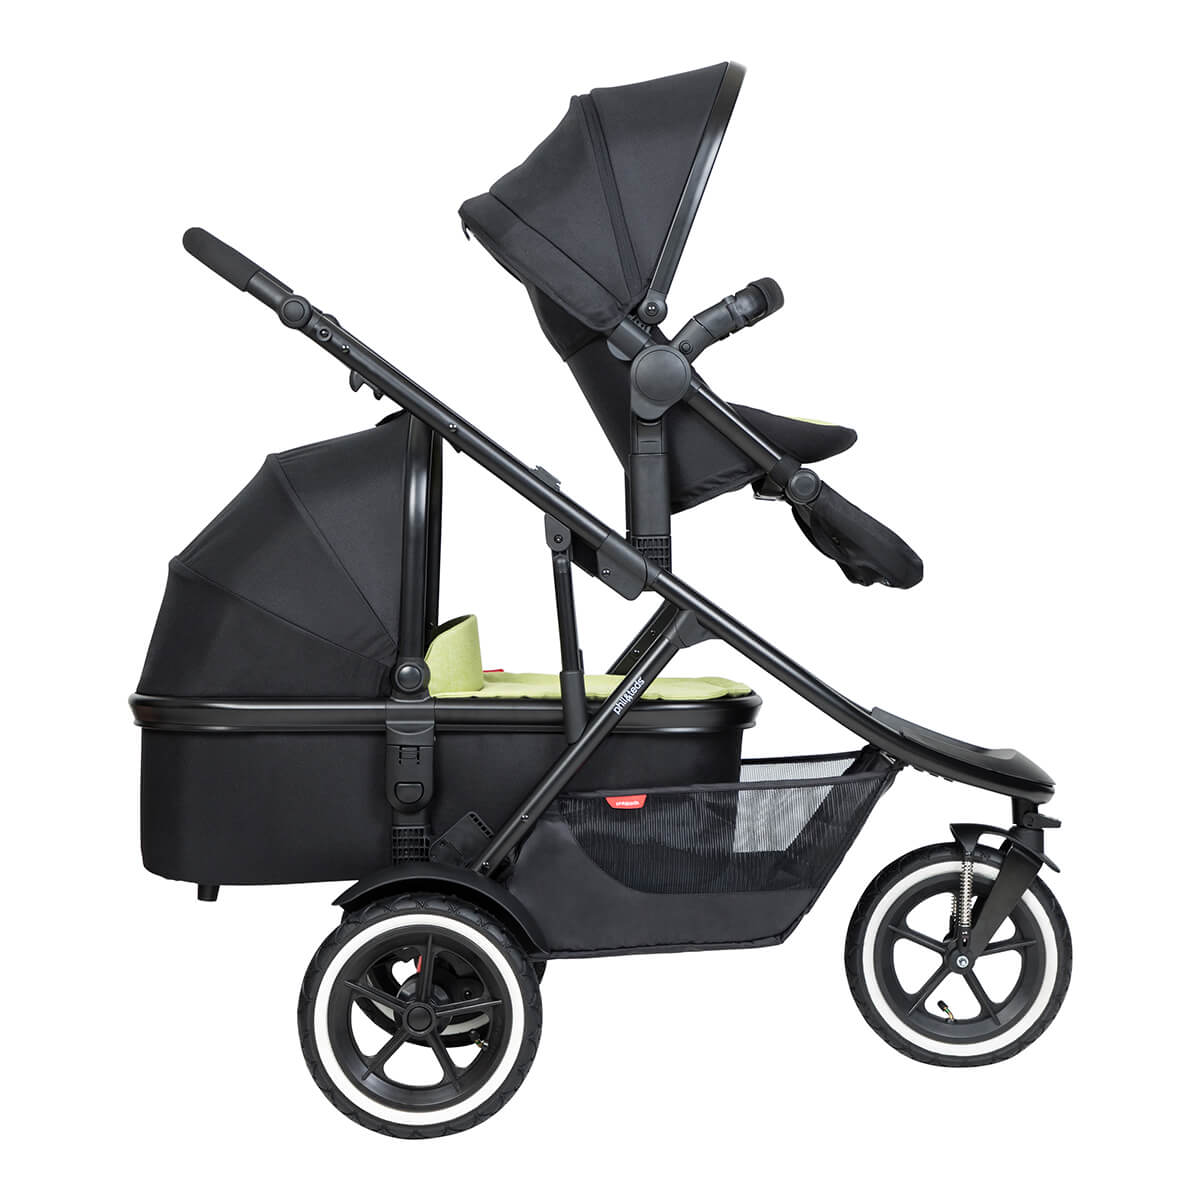 https://cdn.accentuate.io/7508551401650/19437753499826/philteds-sport-buggy-with-double-kit-extended-clip-and-snug-carrycot-side-view-v1667174392057.jpg?1200x1200